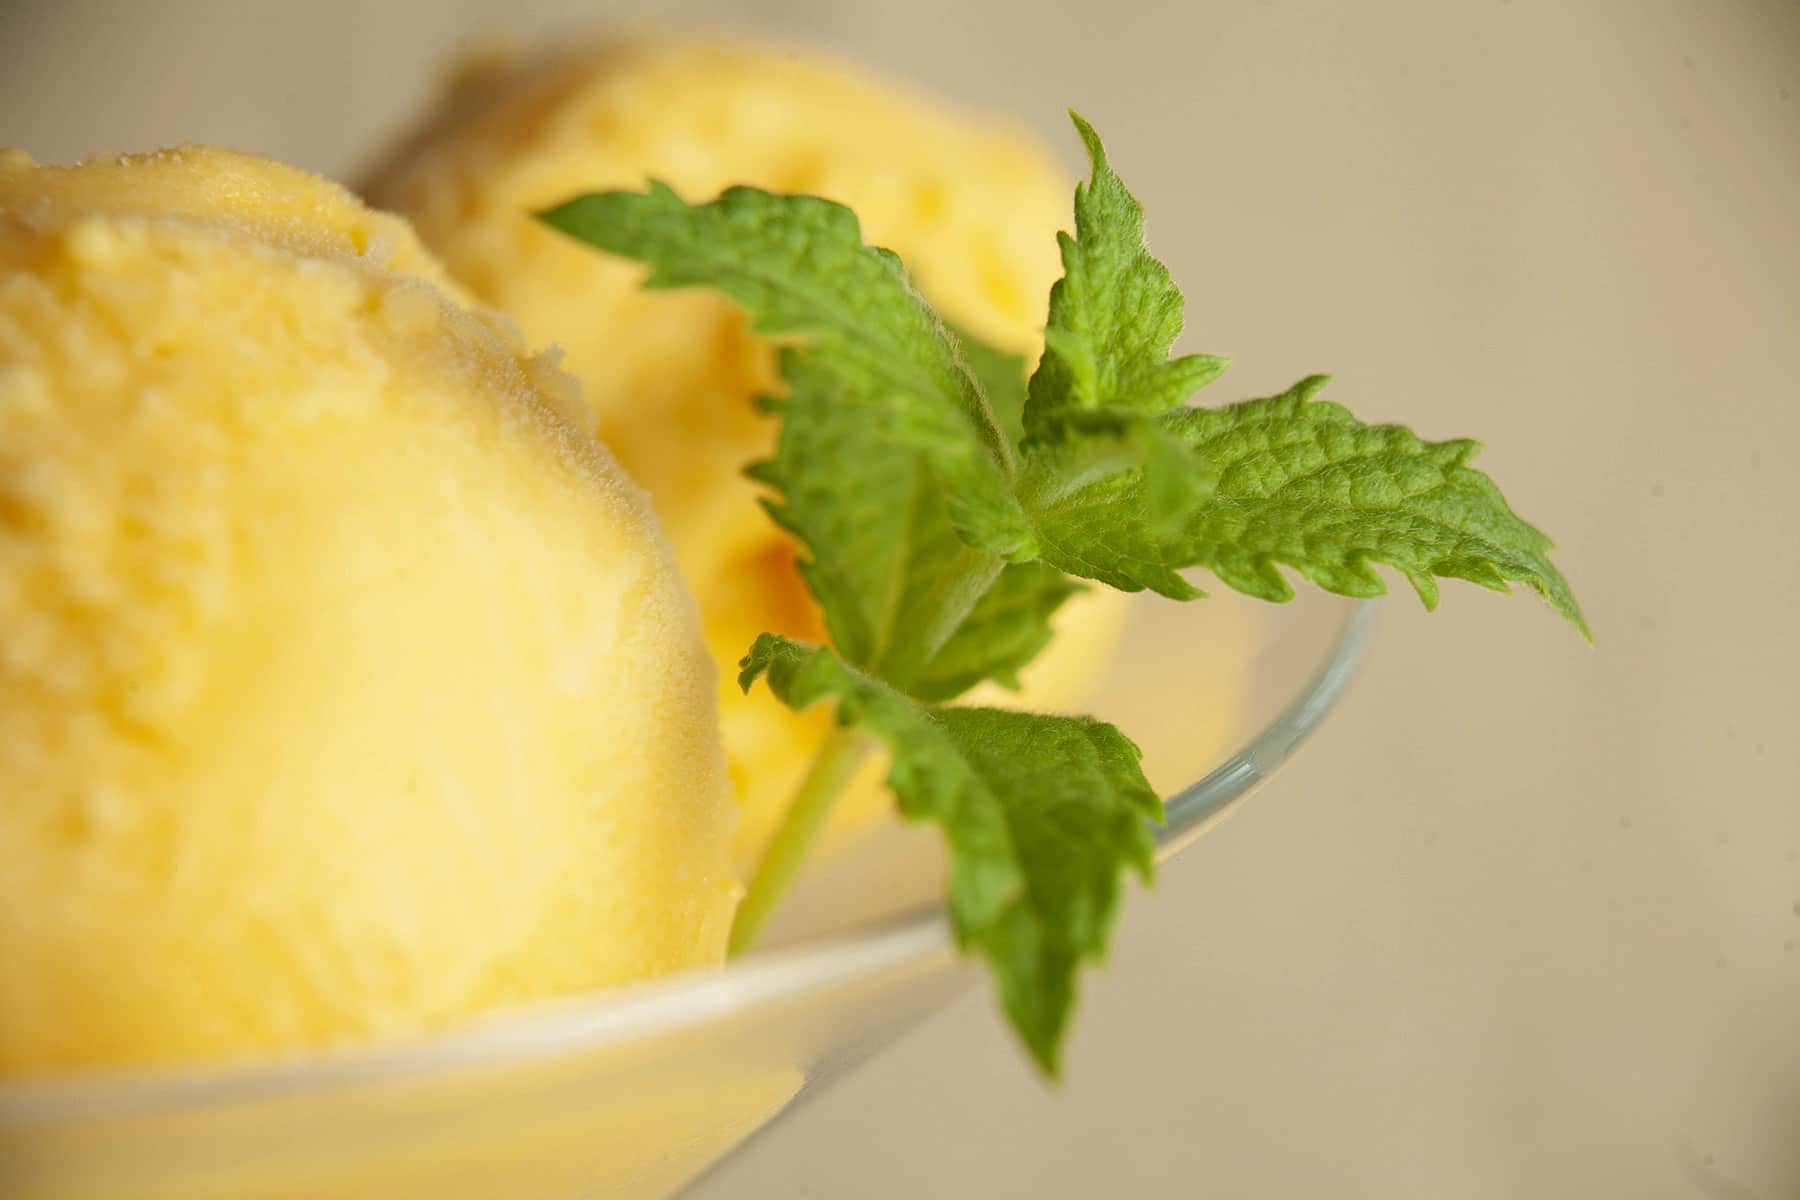 Two scoops of a rich yellow mango mojito ice cream, in a martini glass. It's garnished with a sprig of fresh mint.